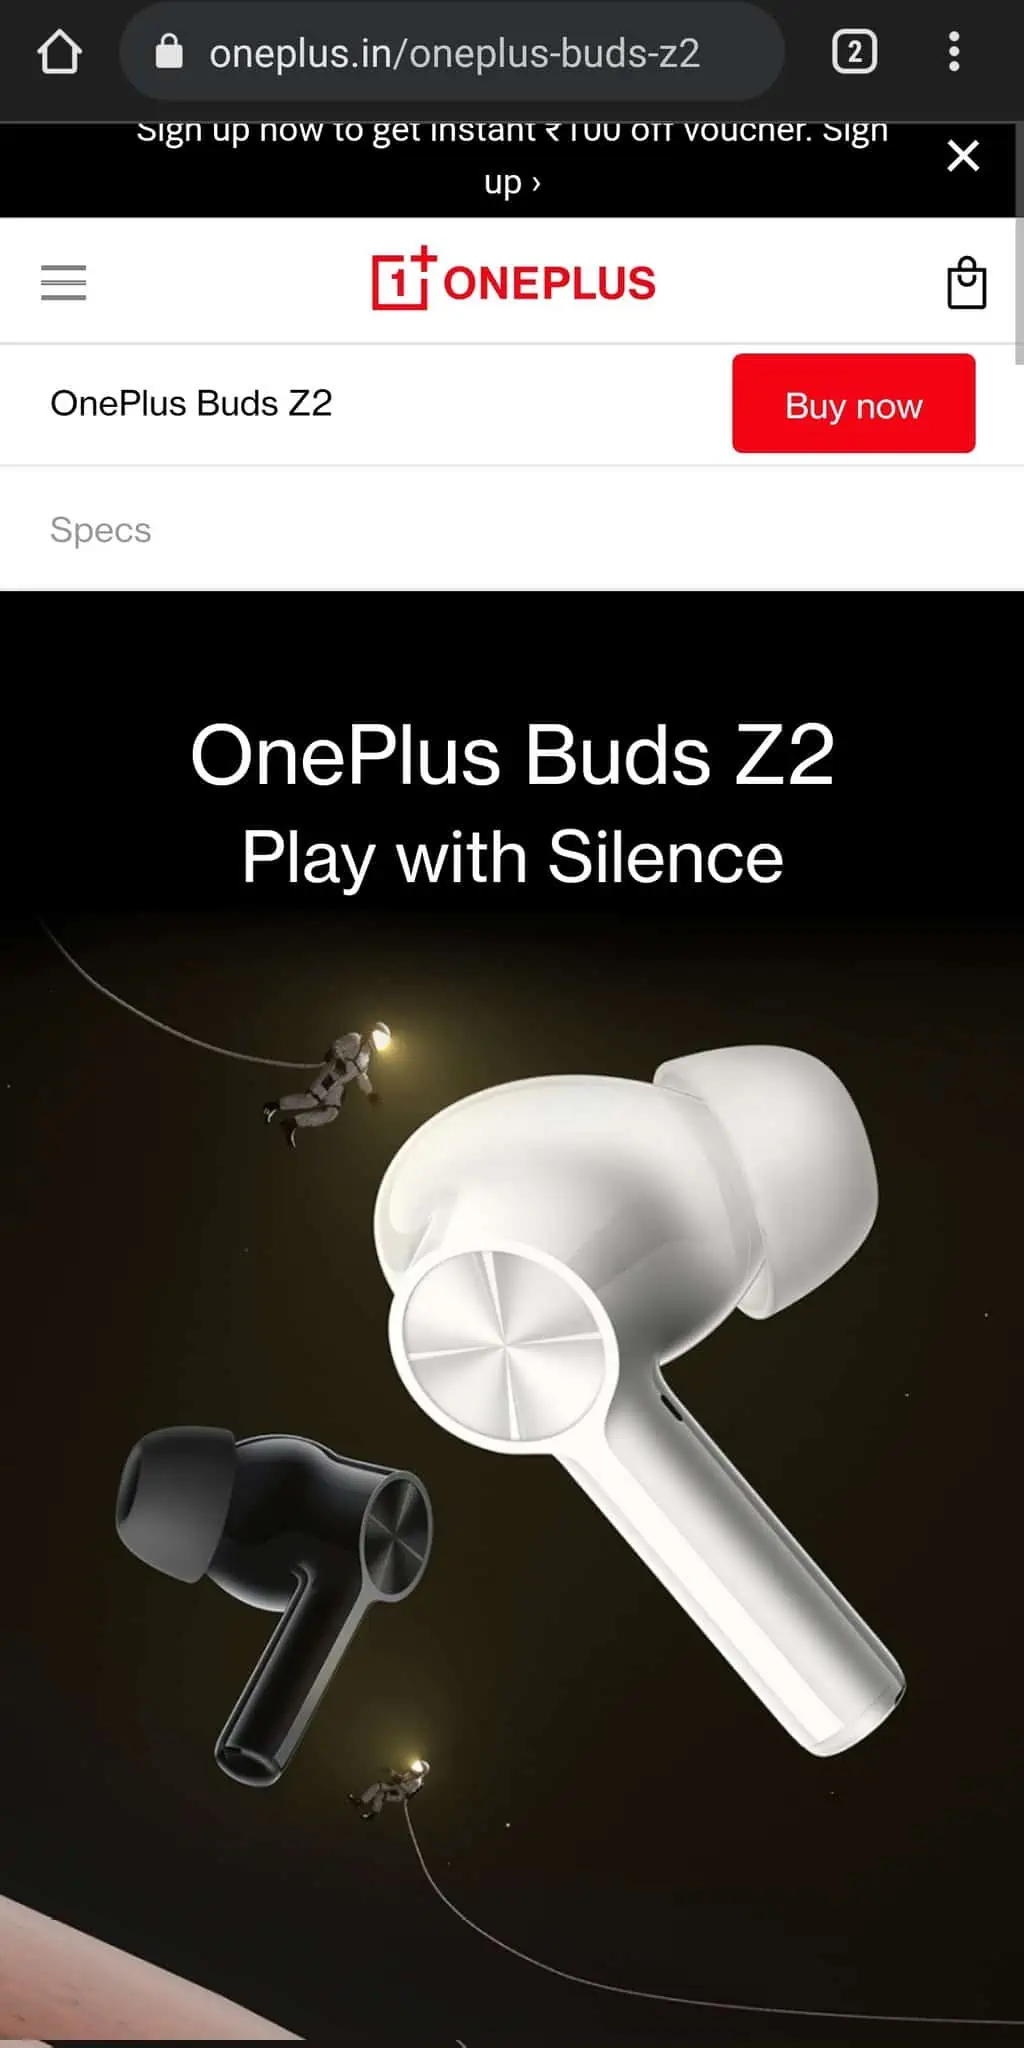 OnePlus Buds Z2 product page